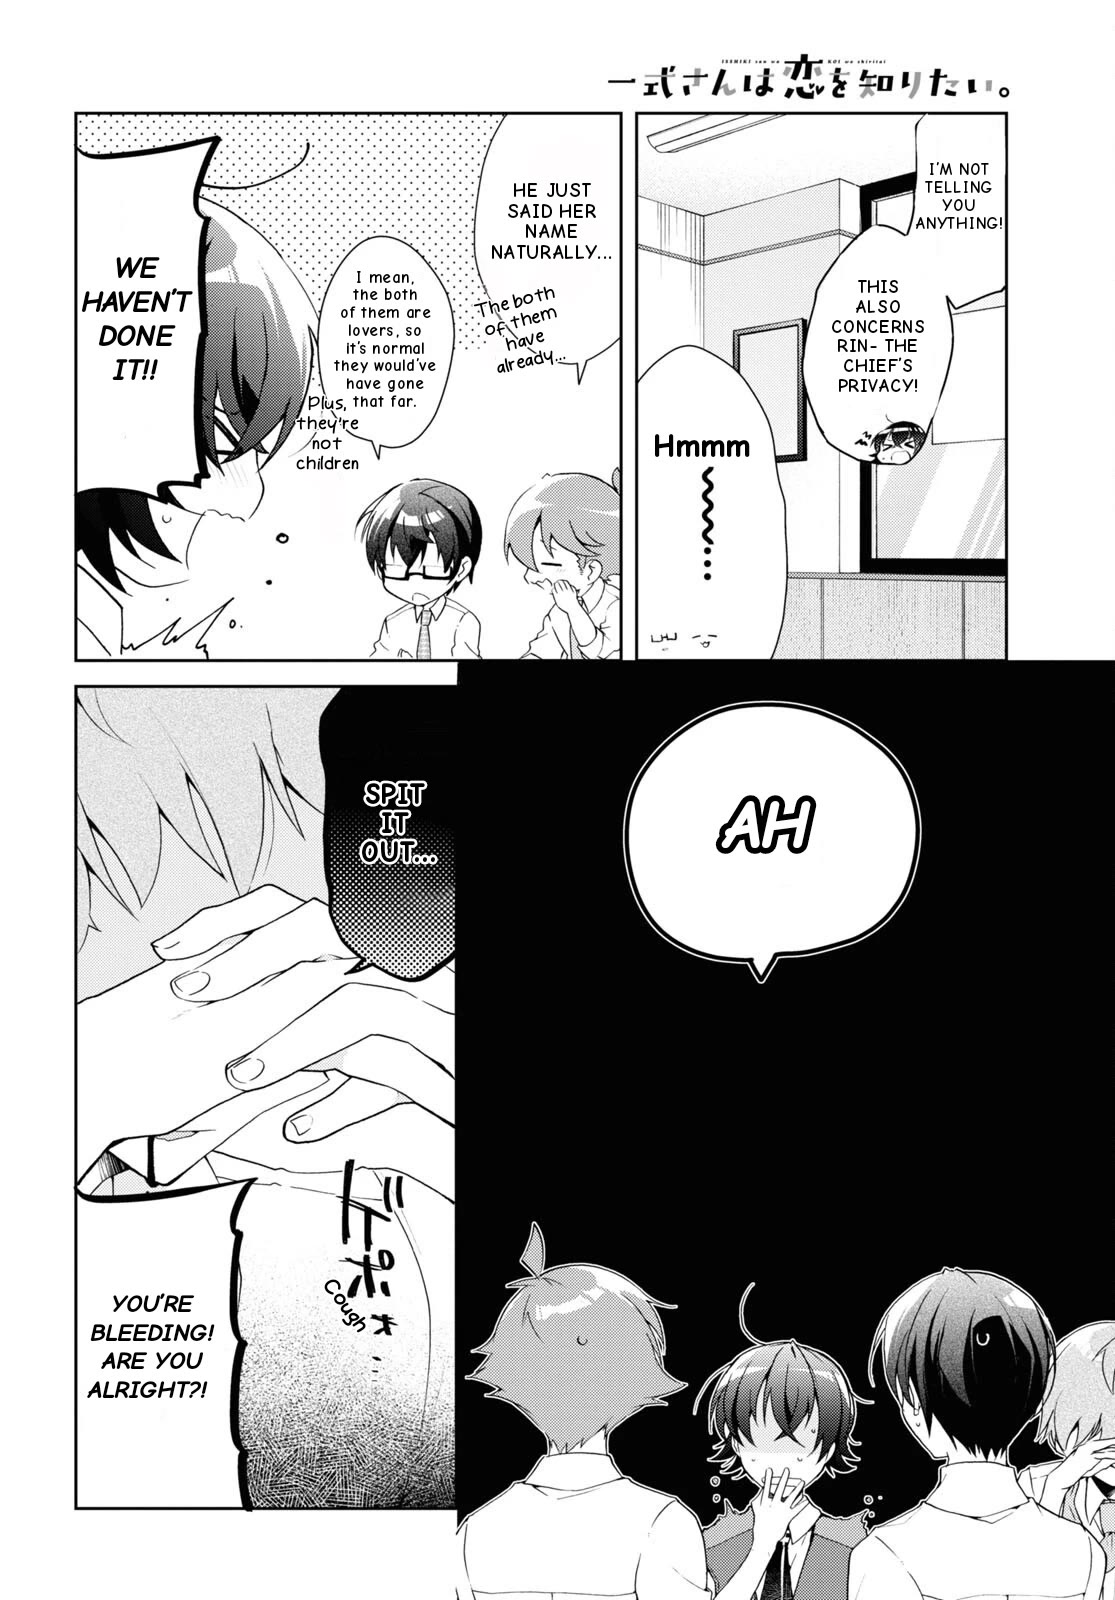 Isshiki-san Wants to Know About Love. - chapter 28 - #6